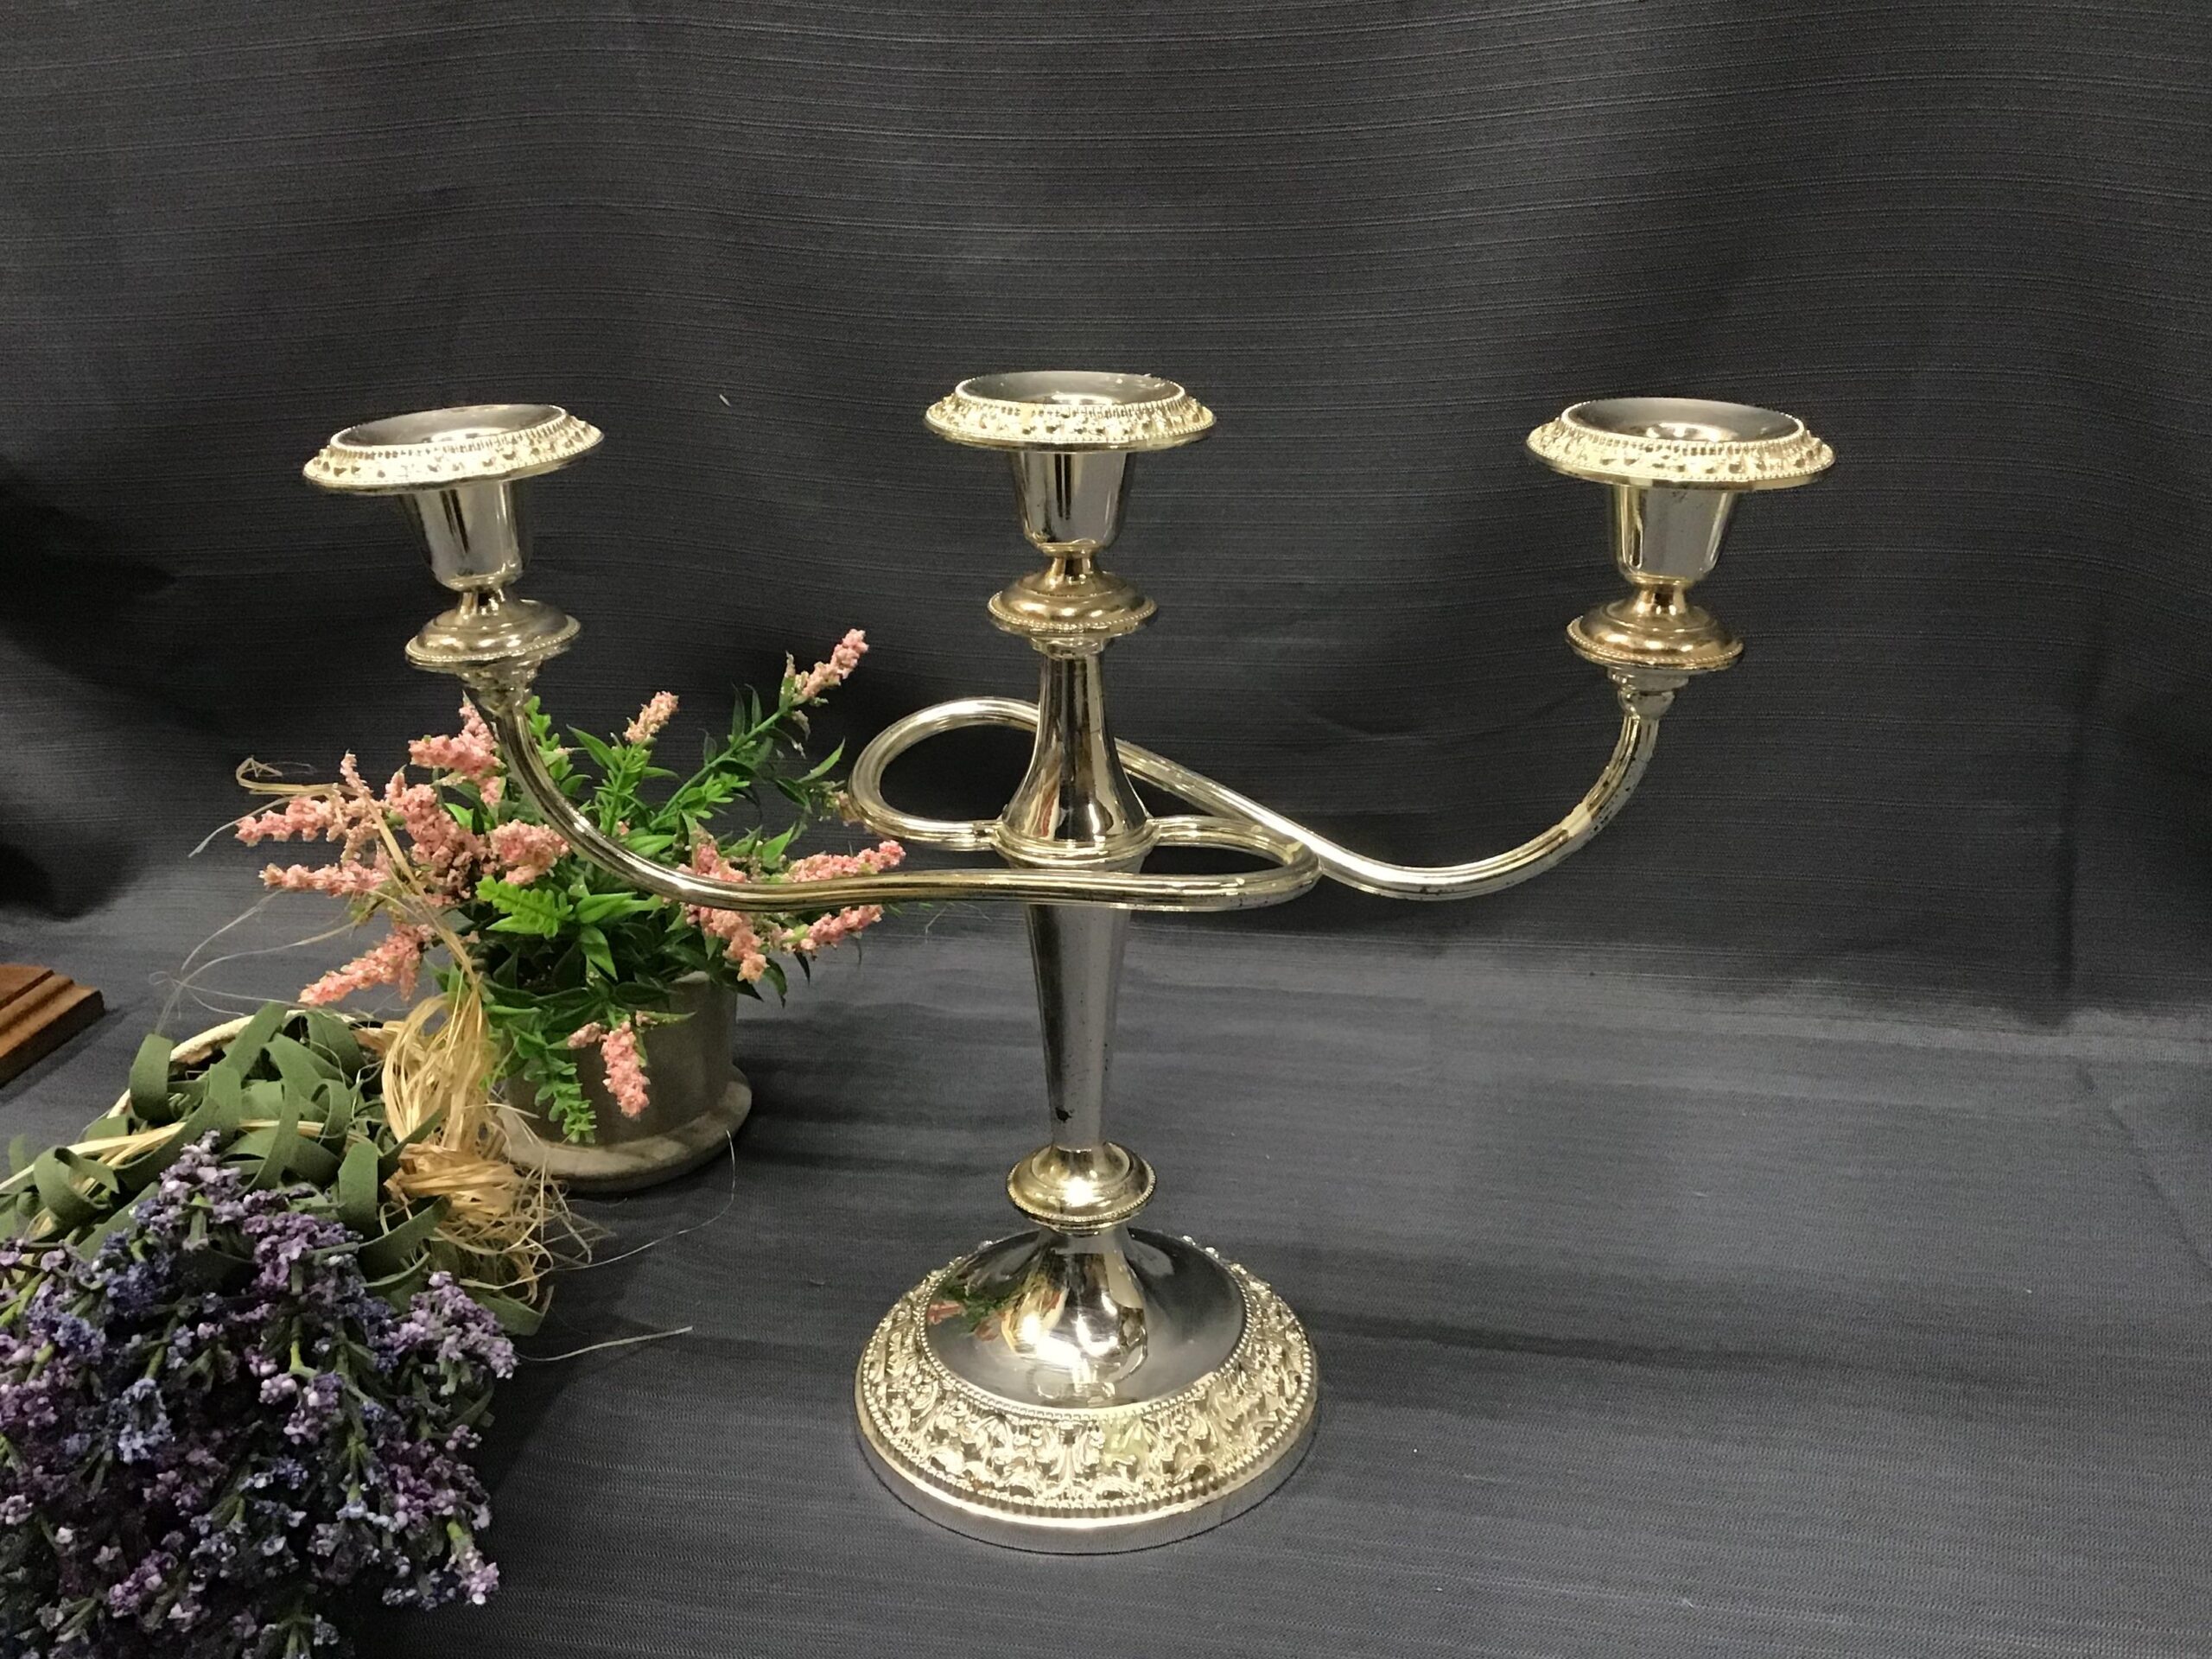 Silver Plated 3-Arm Candlestick Holder